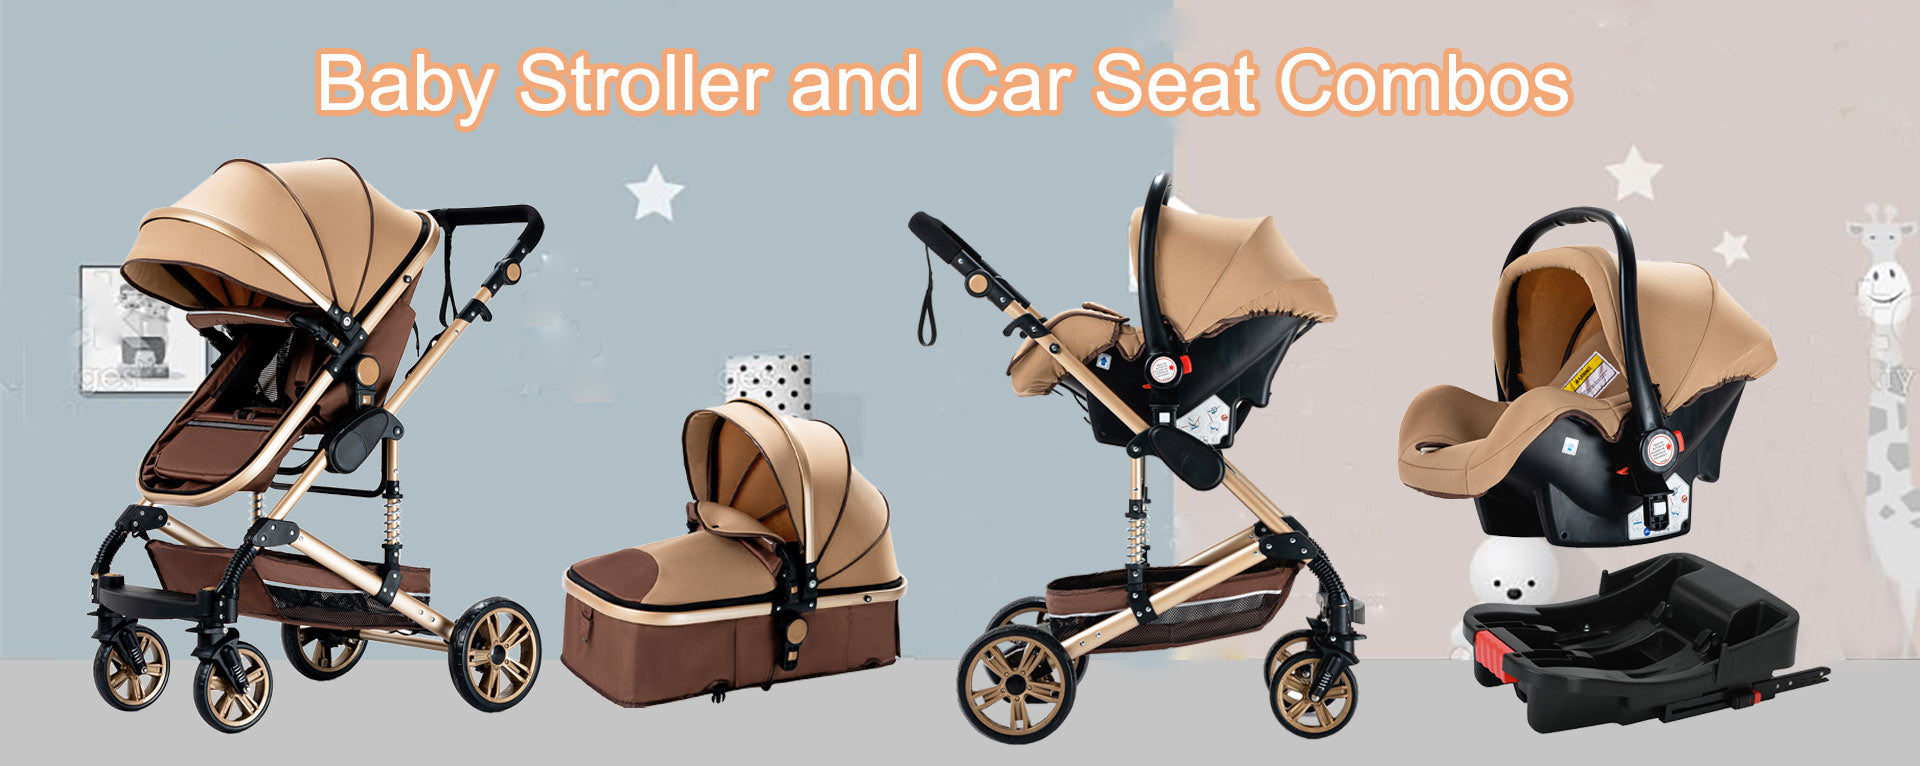 Baby Stroller with Car Seat and Base Combos